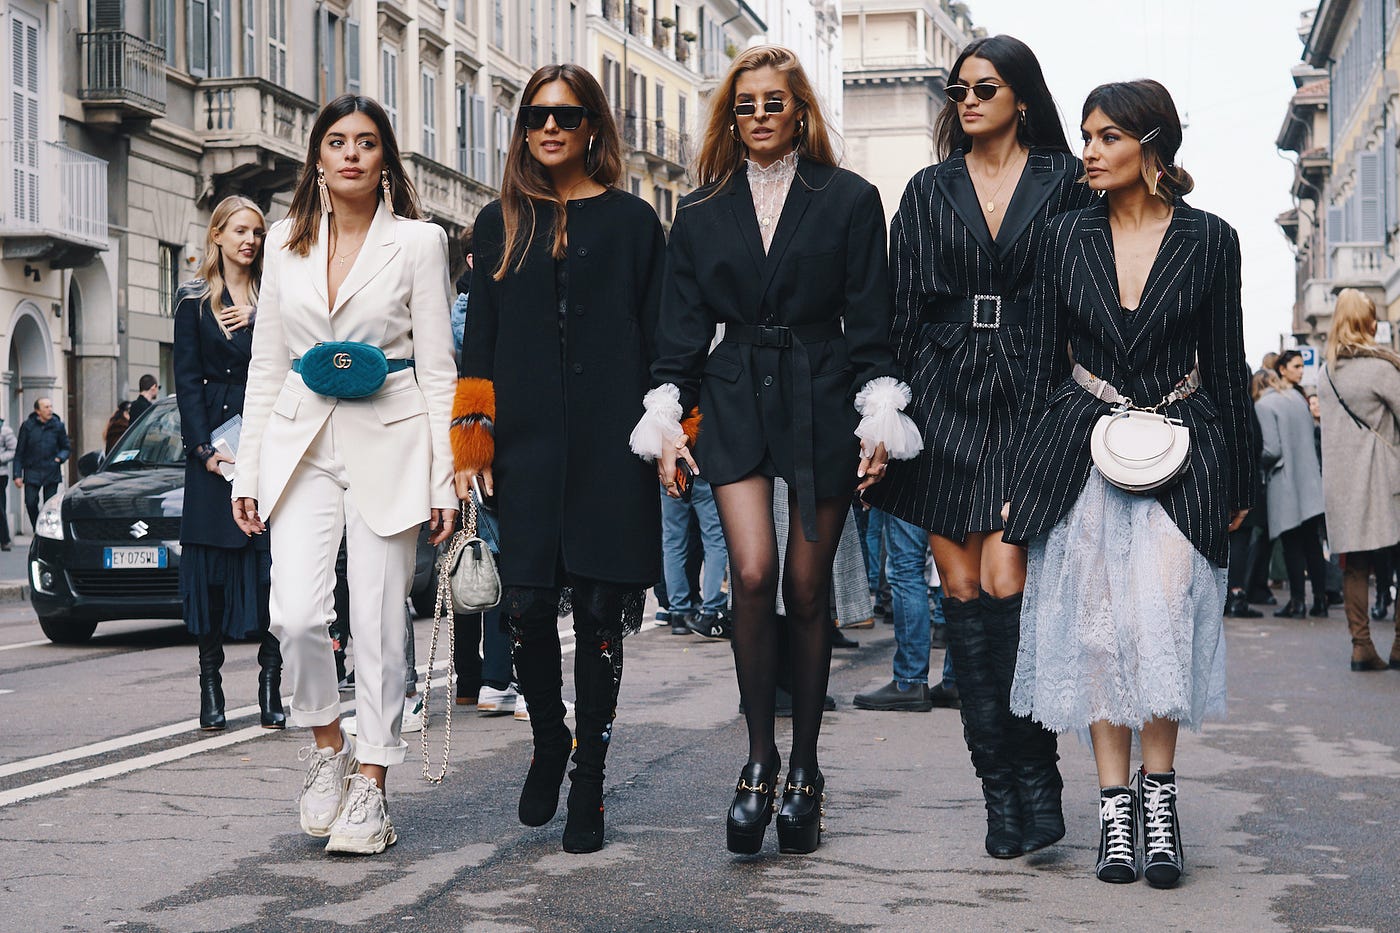 Influencer Culture and Fast Fashion, by Aleska Servian